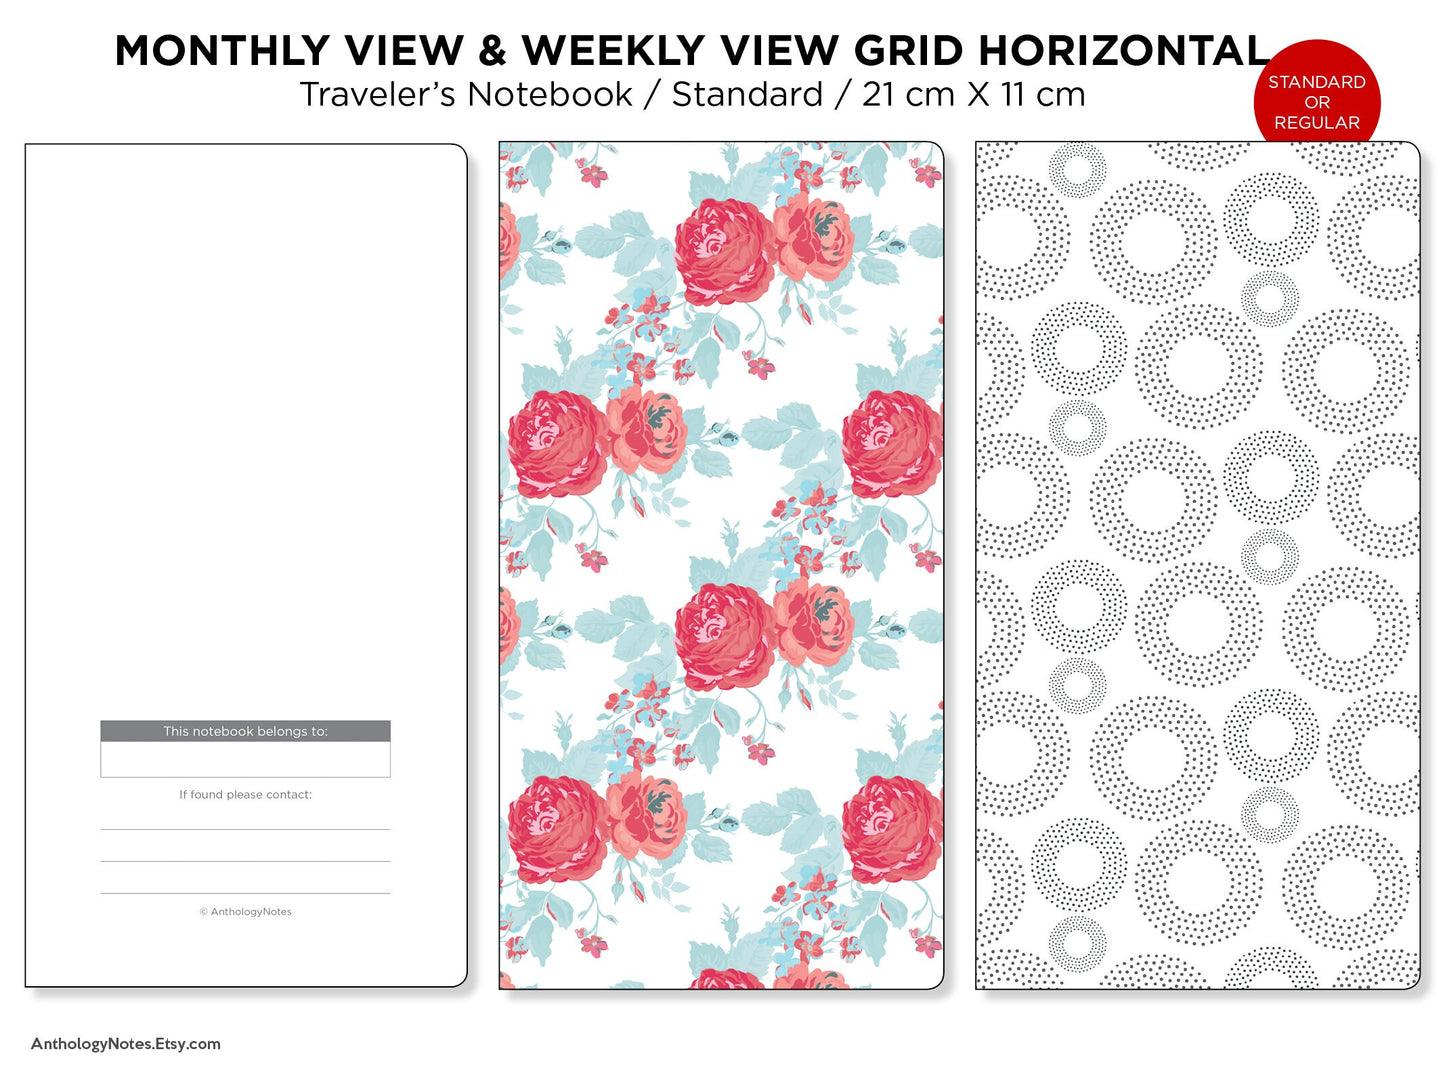 Monthly Weekly Horizontal GRID Traveler's Notebook Standard Size Printable Insert  Mo2P Wo1P Grid Undated